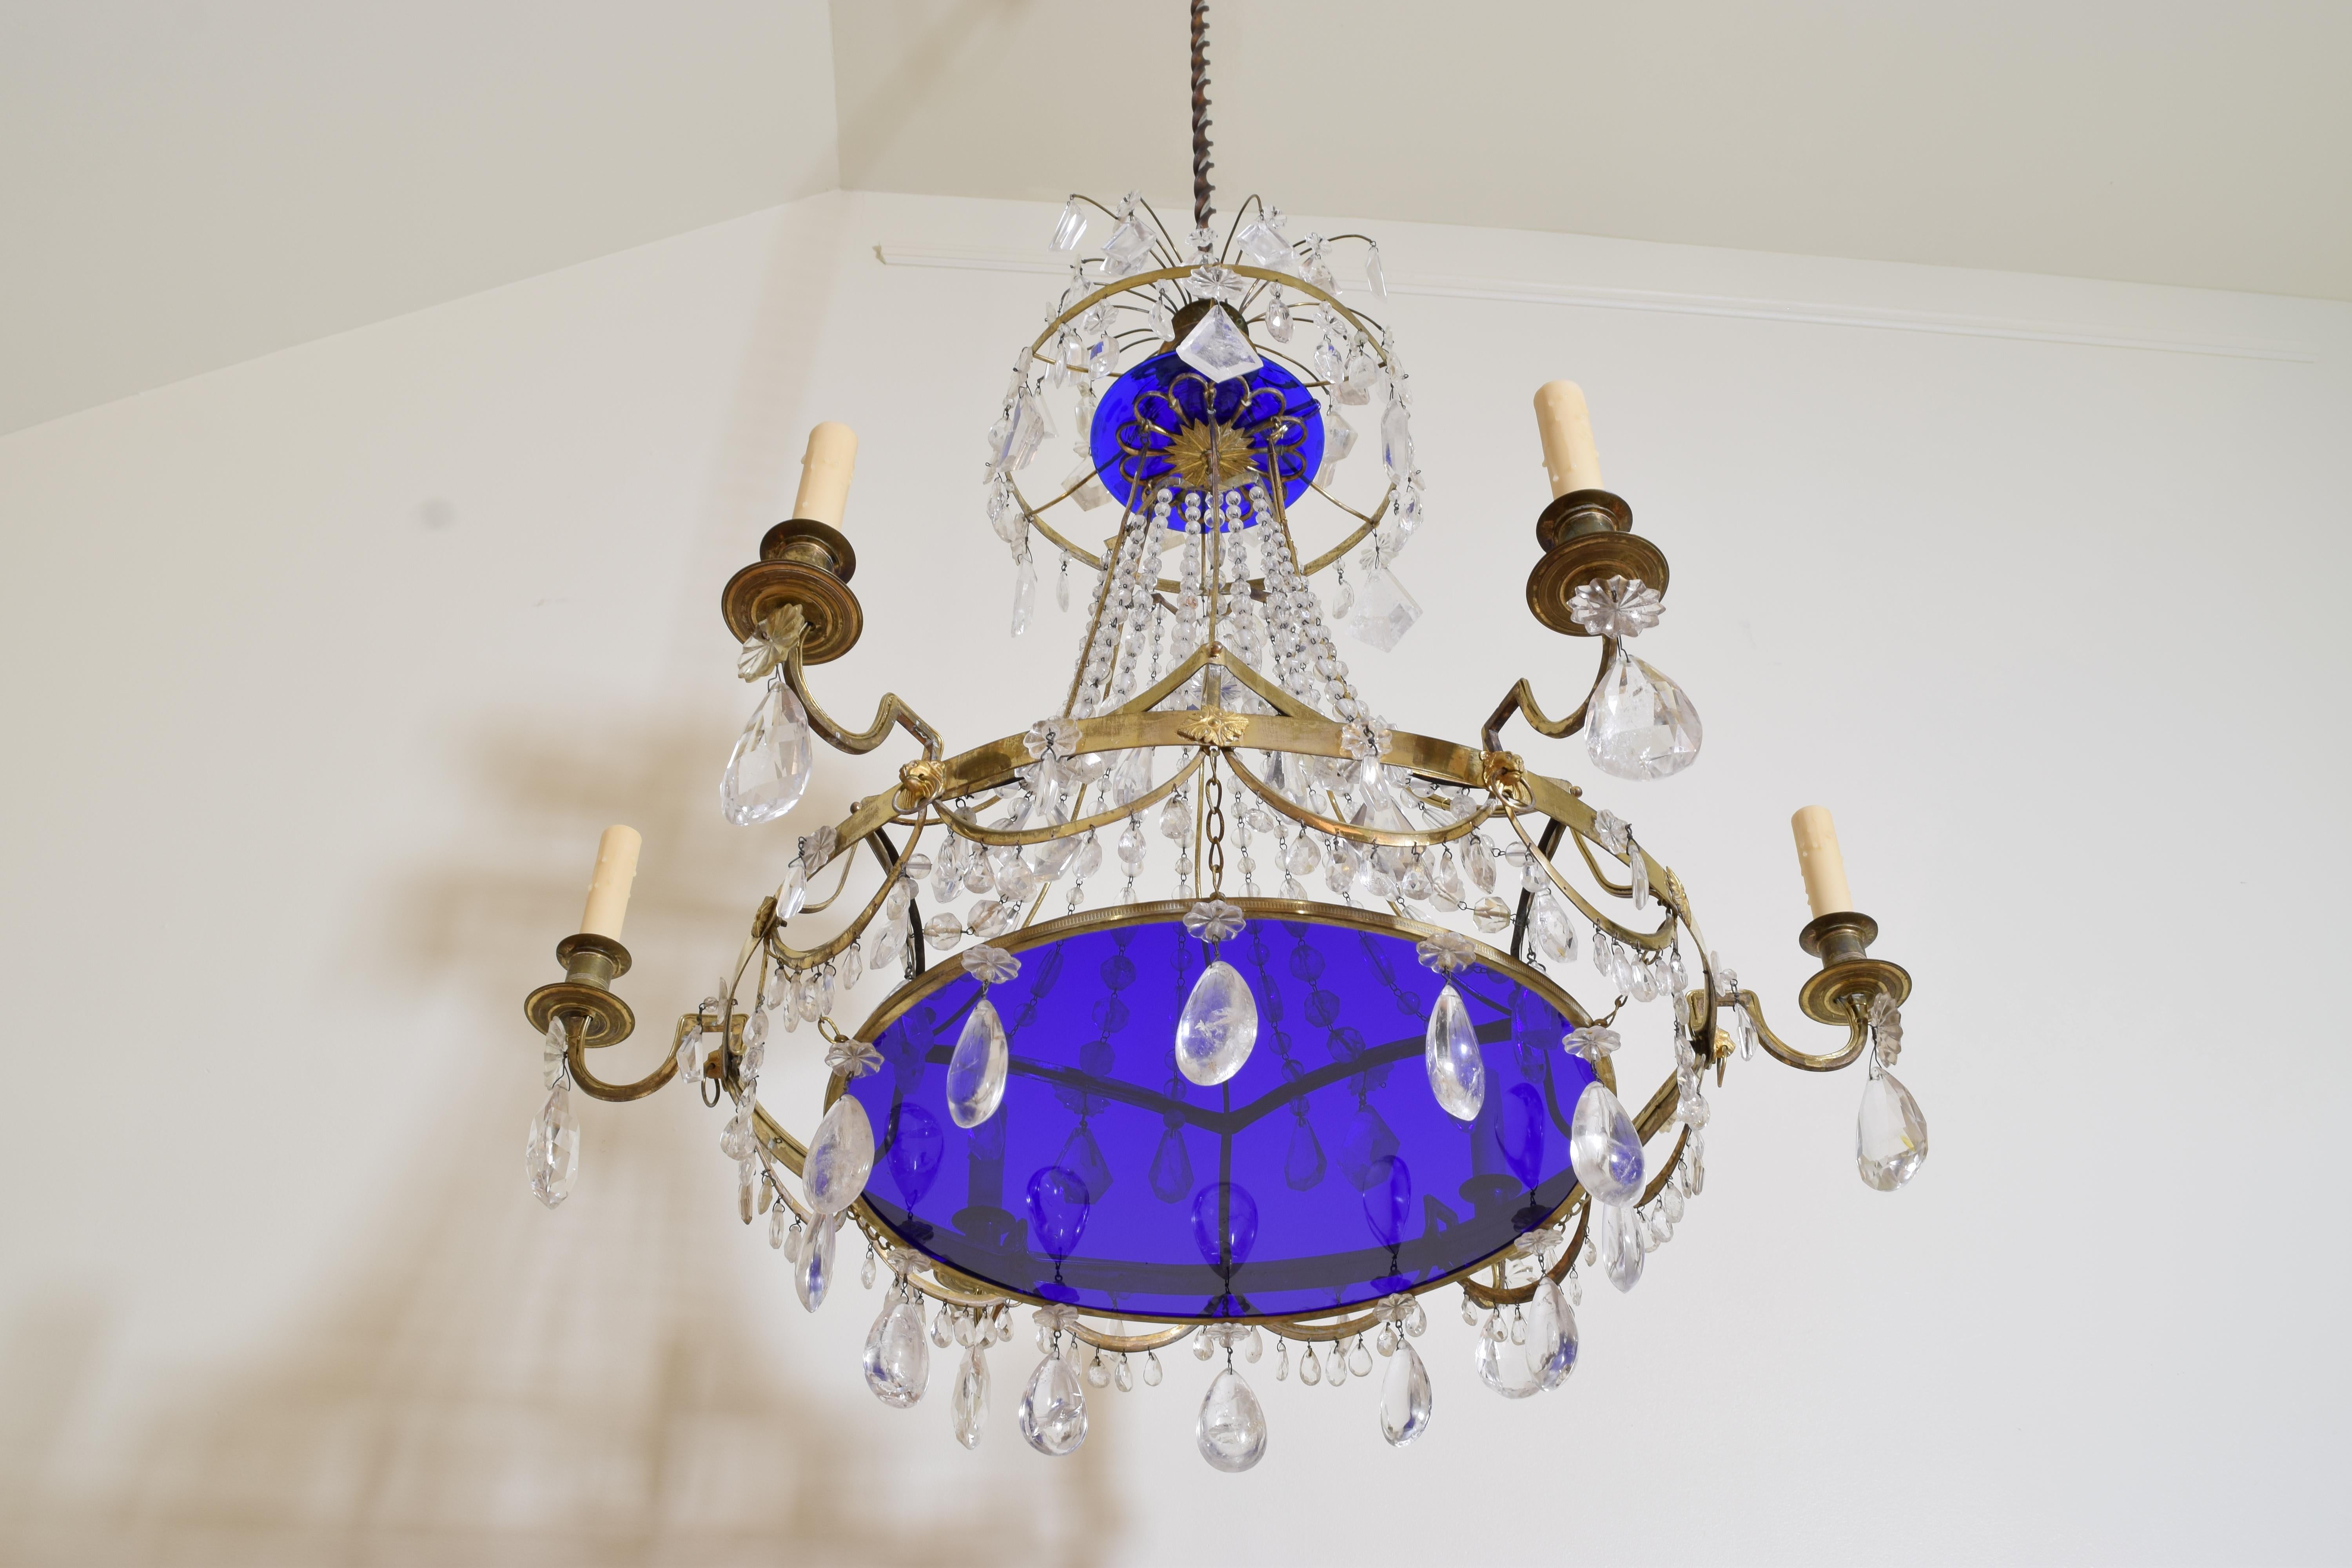 Early 19th Century Baltic Neoclassic Ormolu, Rock Crystal & Cobalt Blue Glass Chandelier, c 1800 For Sale